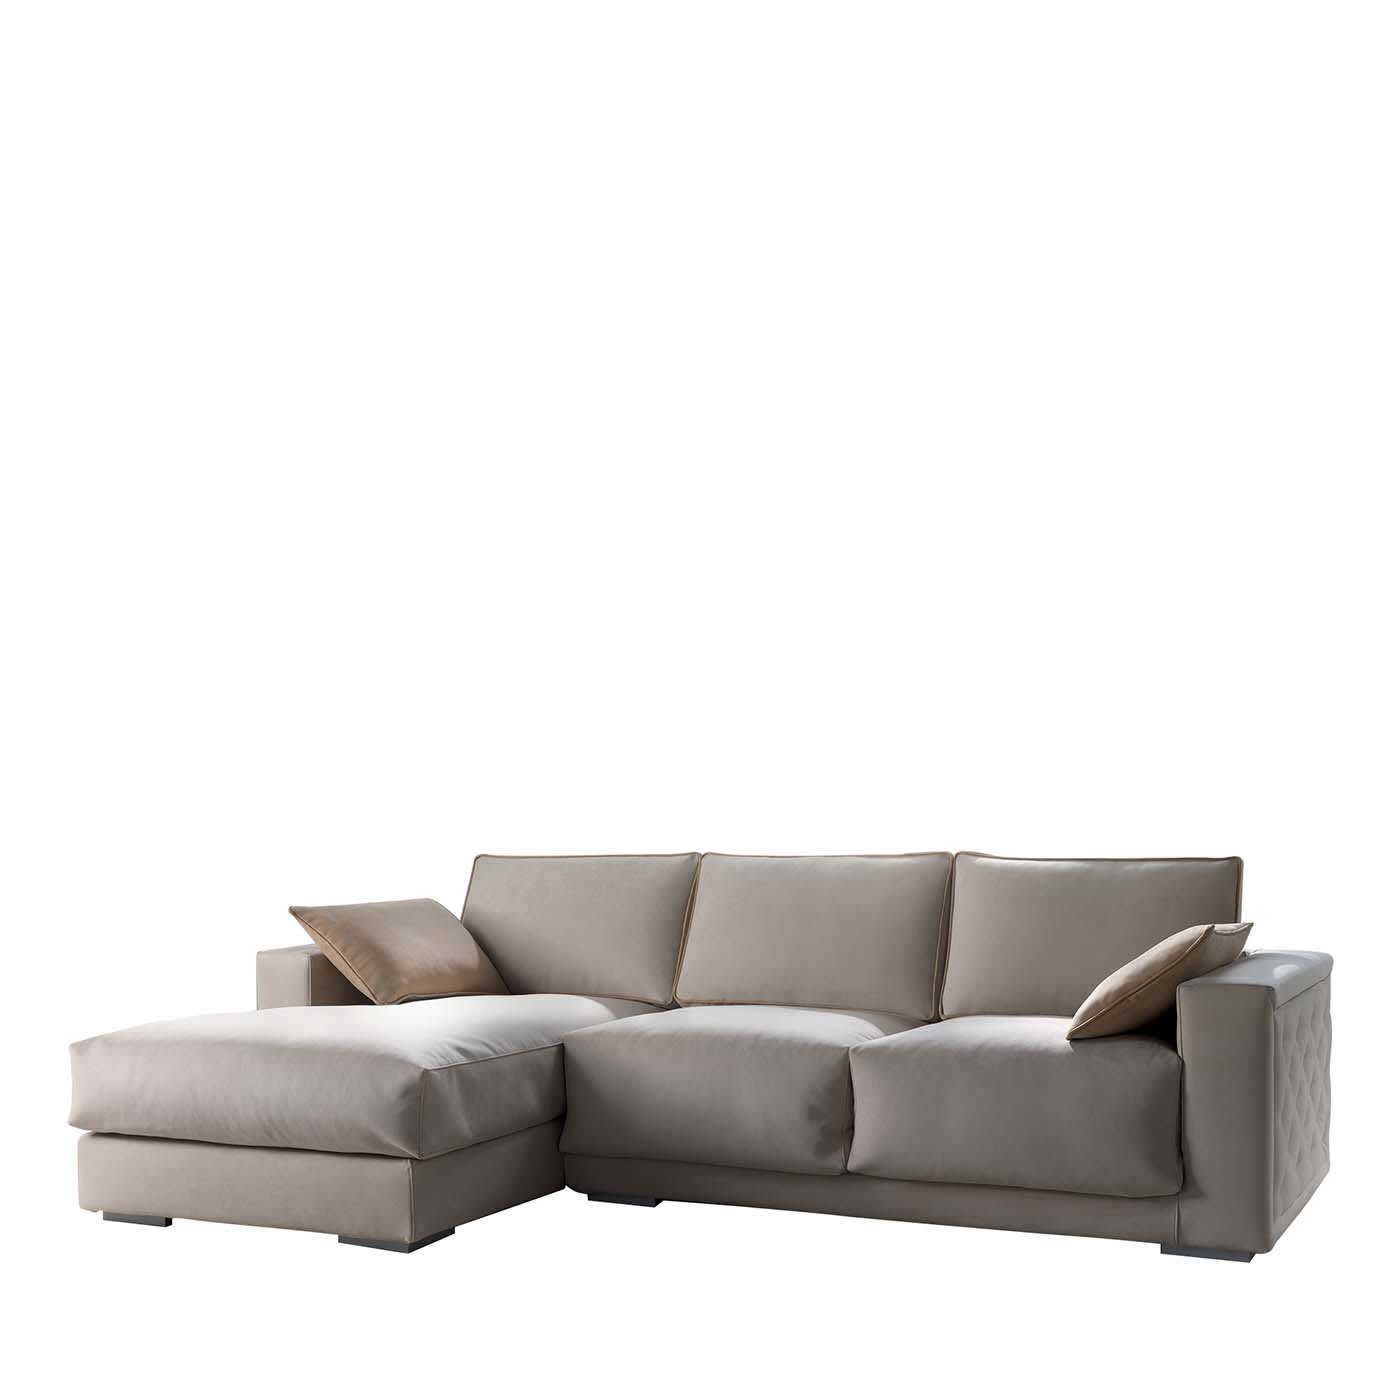 Sofa with Chaise Longue - Modenese Gastone